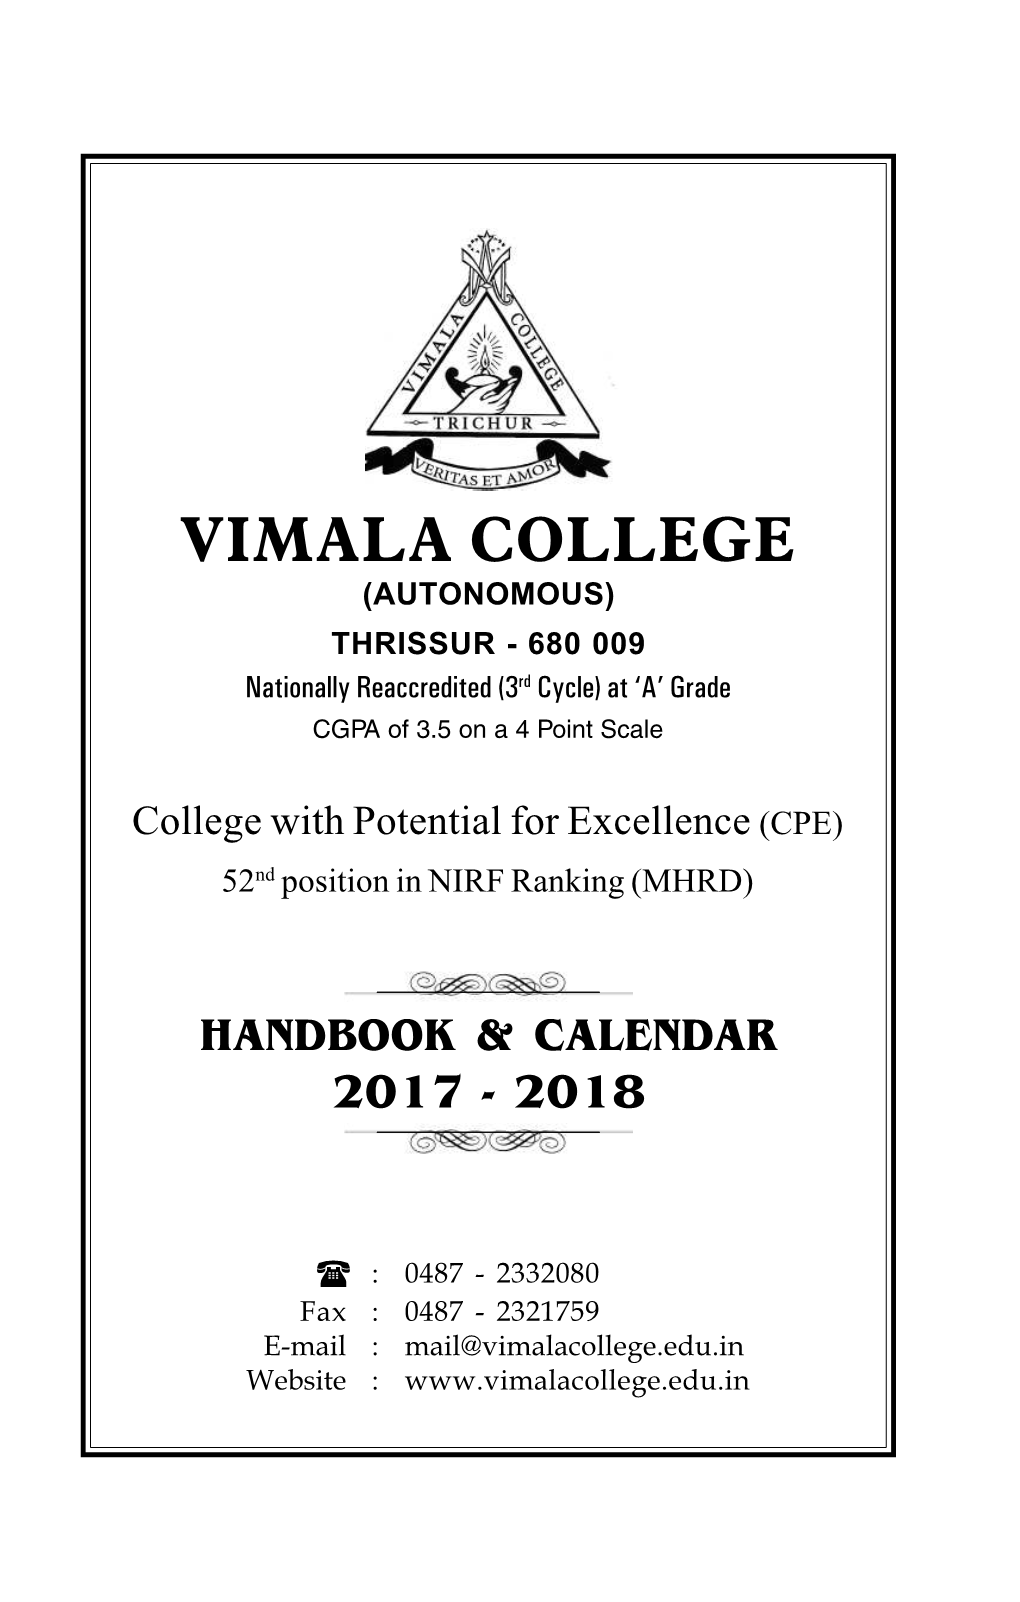 VIMALA COLLEGE (AUTONOMOUS) THRISSUR - 680 009 Nationally Reaccredited (3Rd Cycle) at ‘A’ Grade CGPA of 3.5 on a 4 Point Scale